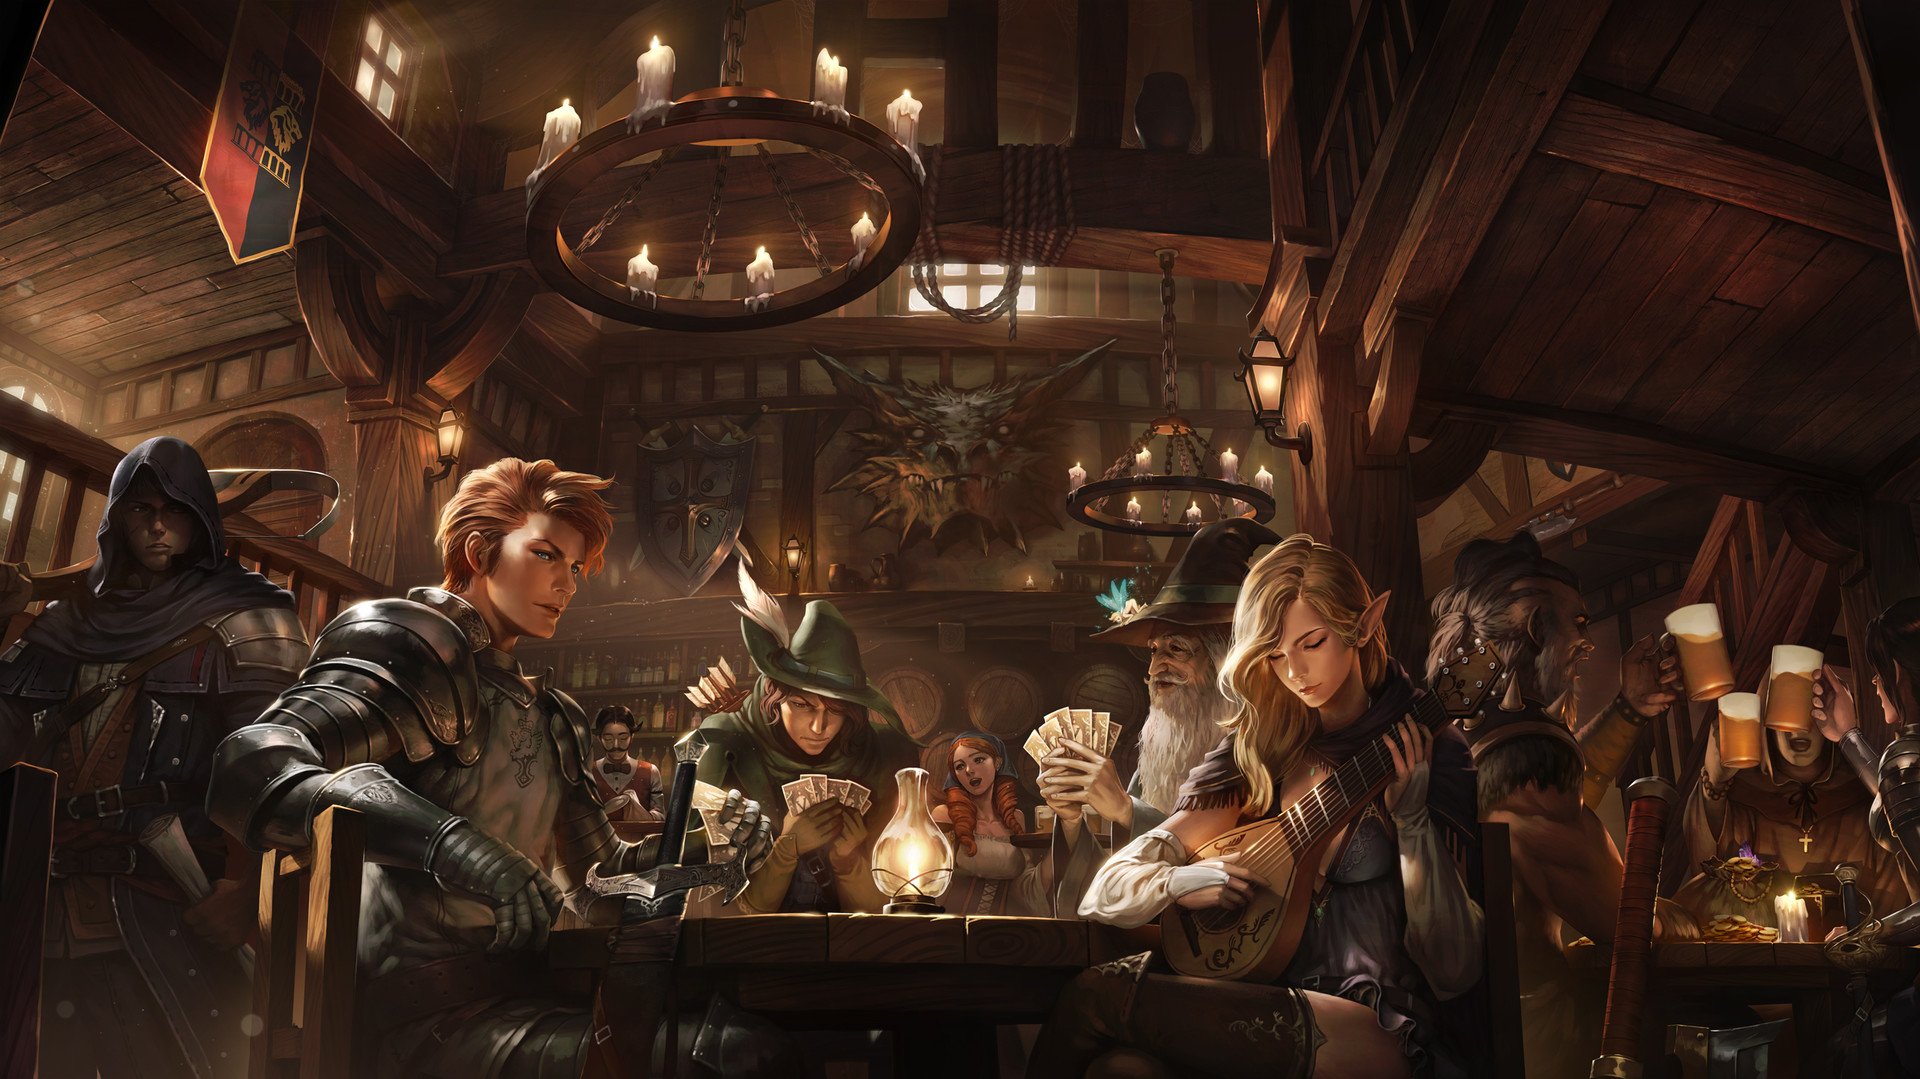 pointed ears, Fantasy art, Tavern, Candles Wallpapers HD / Desktop and Mobi...